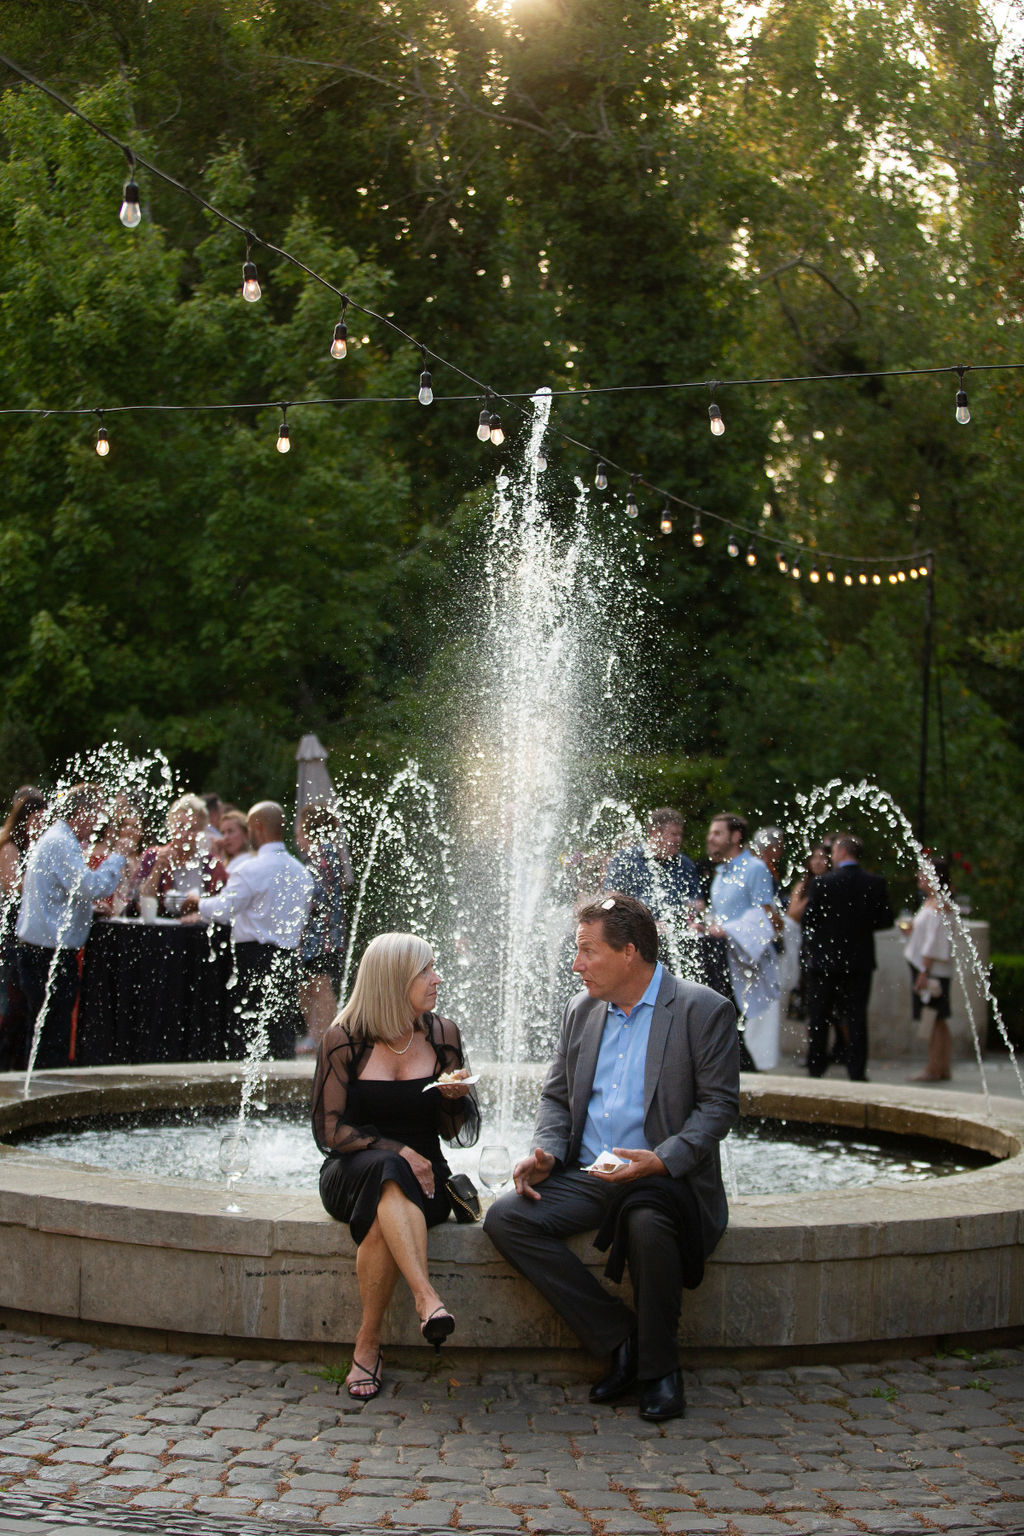 David and Diane LaMonica, owners of Salt and Stone Restaurant, enjoy a bite to eat in front of the fountain at the Sonoma Magazine 10th Anniversary Party at Buena Vista Winery in Sonoma, CA. The event took place on July 28, 2022. (Photo by Charlie Gesell)